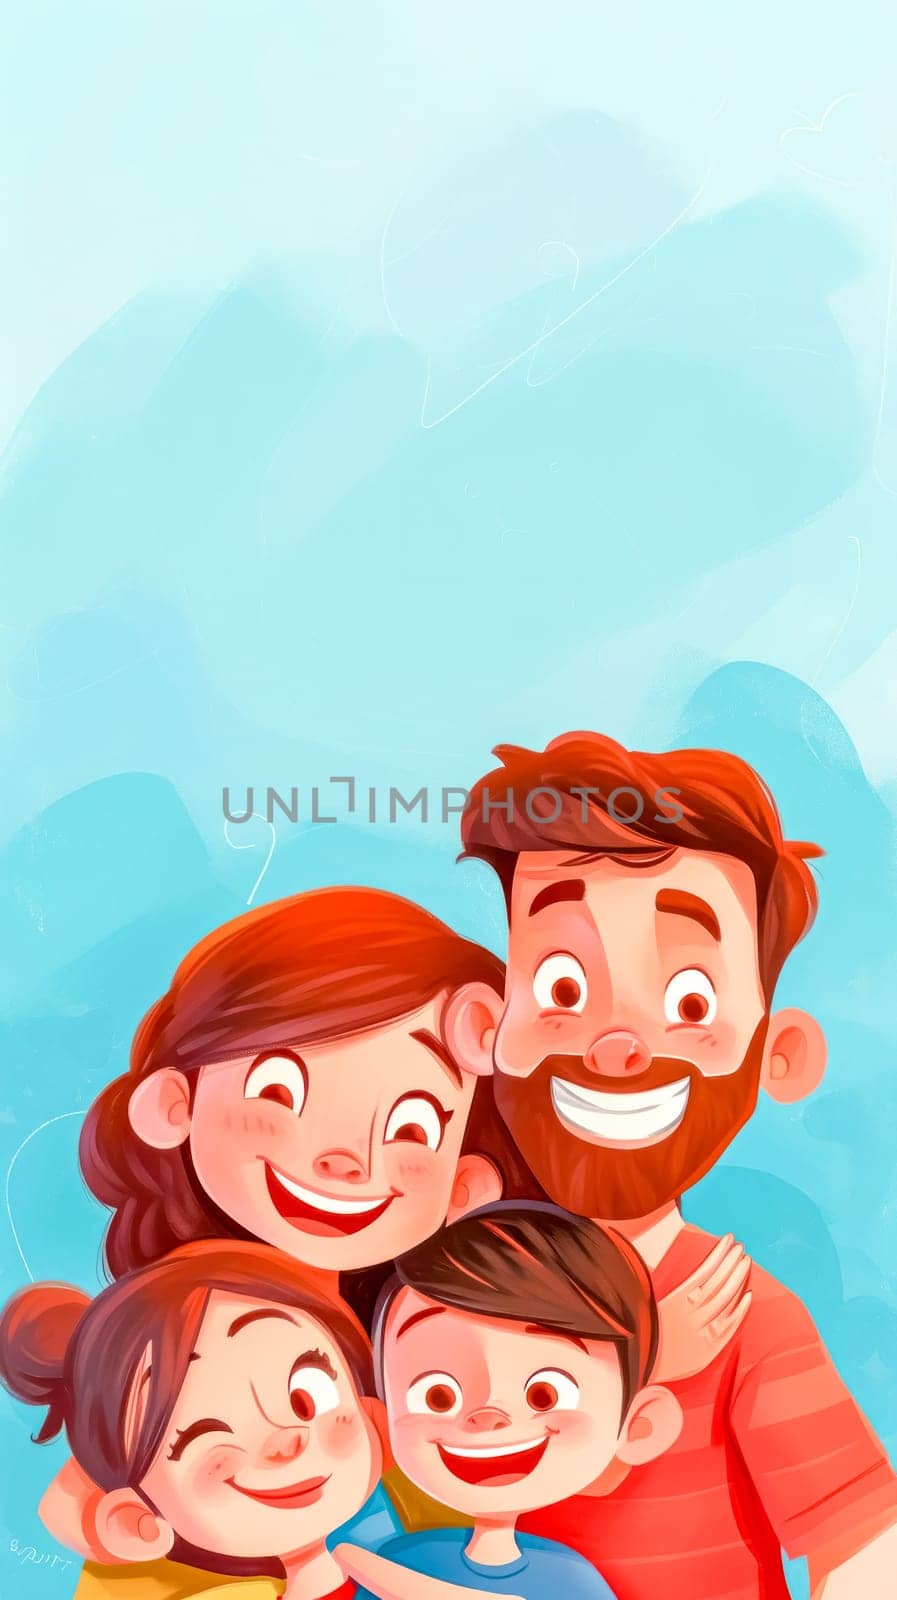 happy cartoon family with a father, mother, daughter, and son smiling together against a light blue background by Edophoto